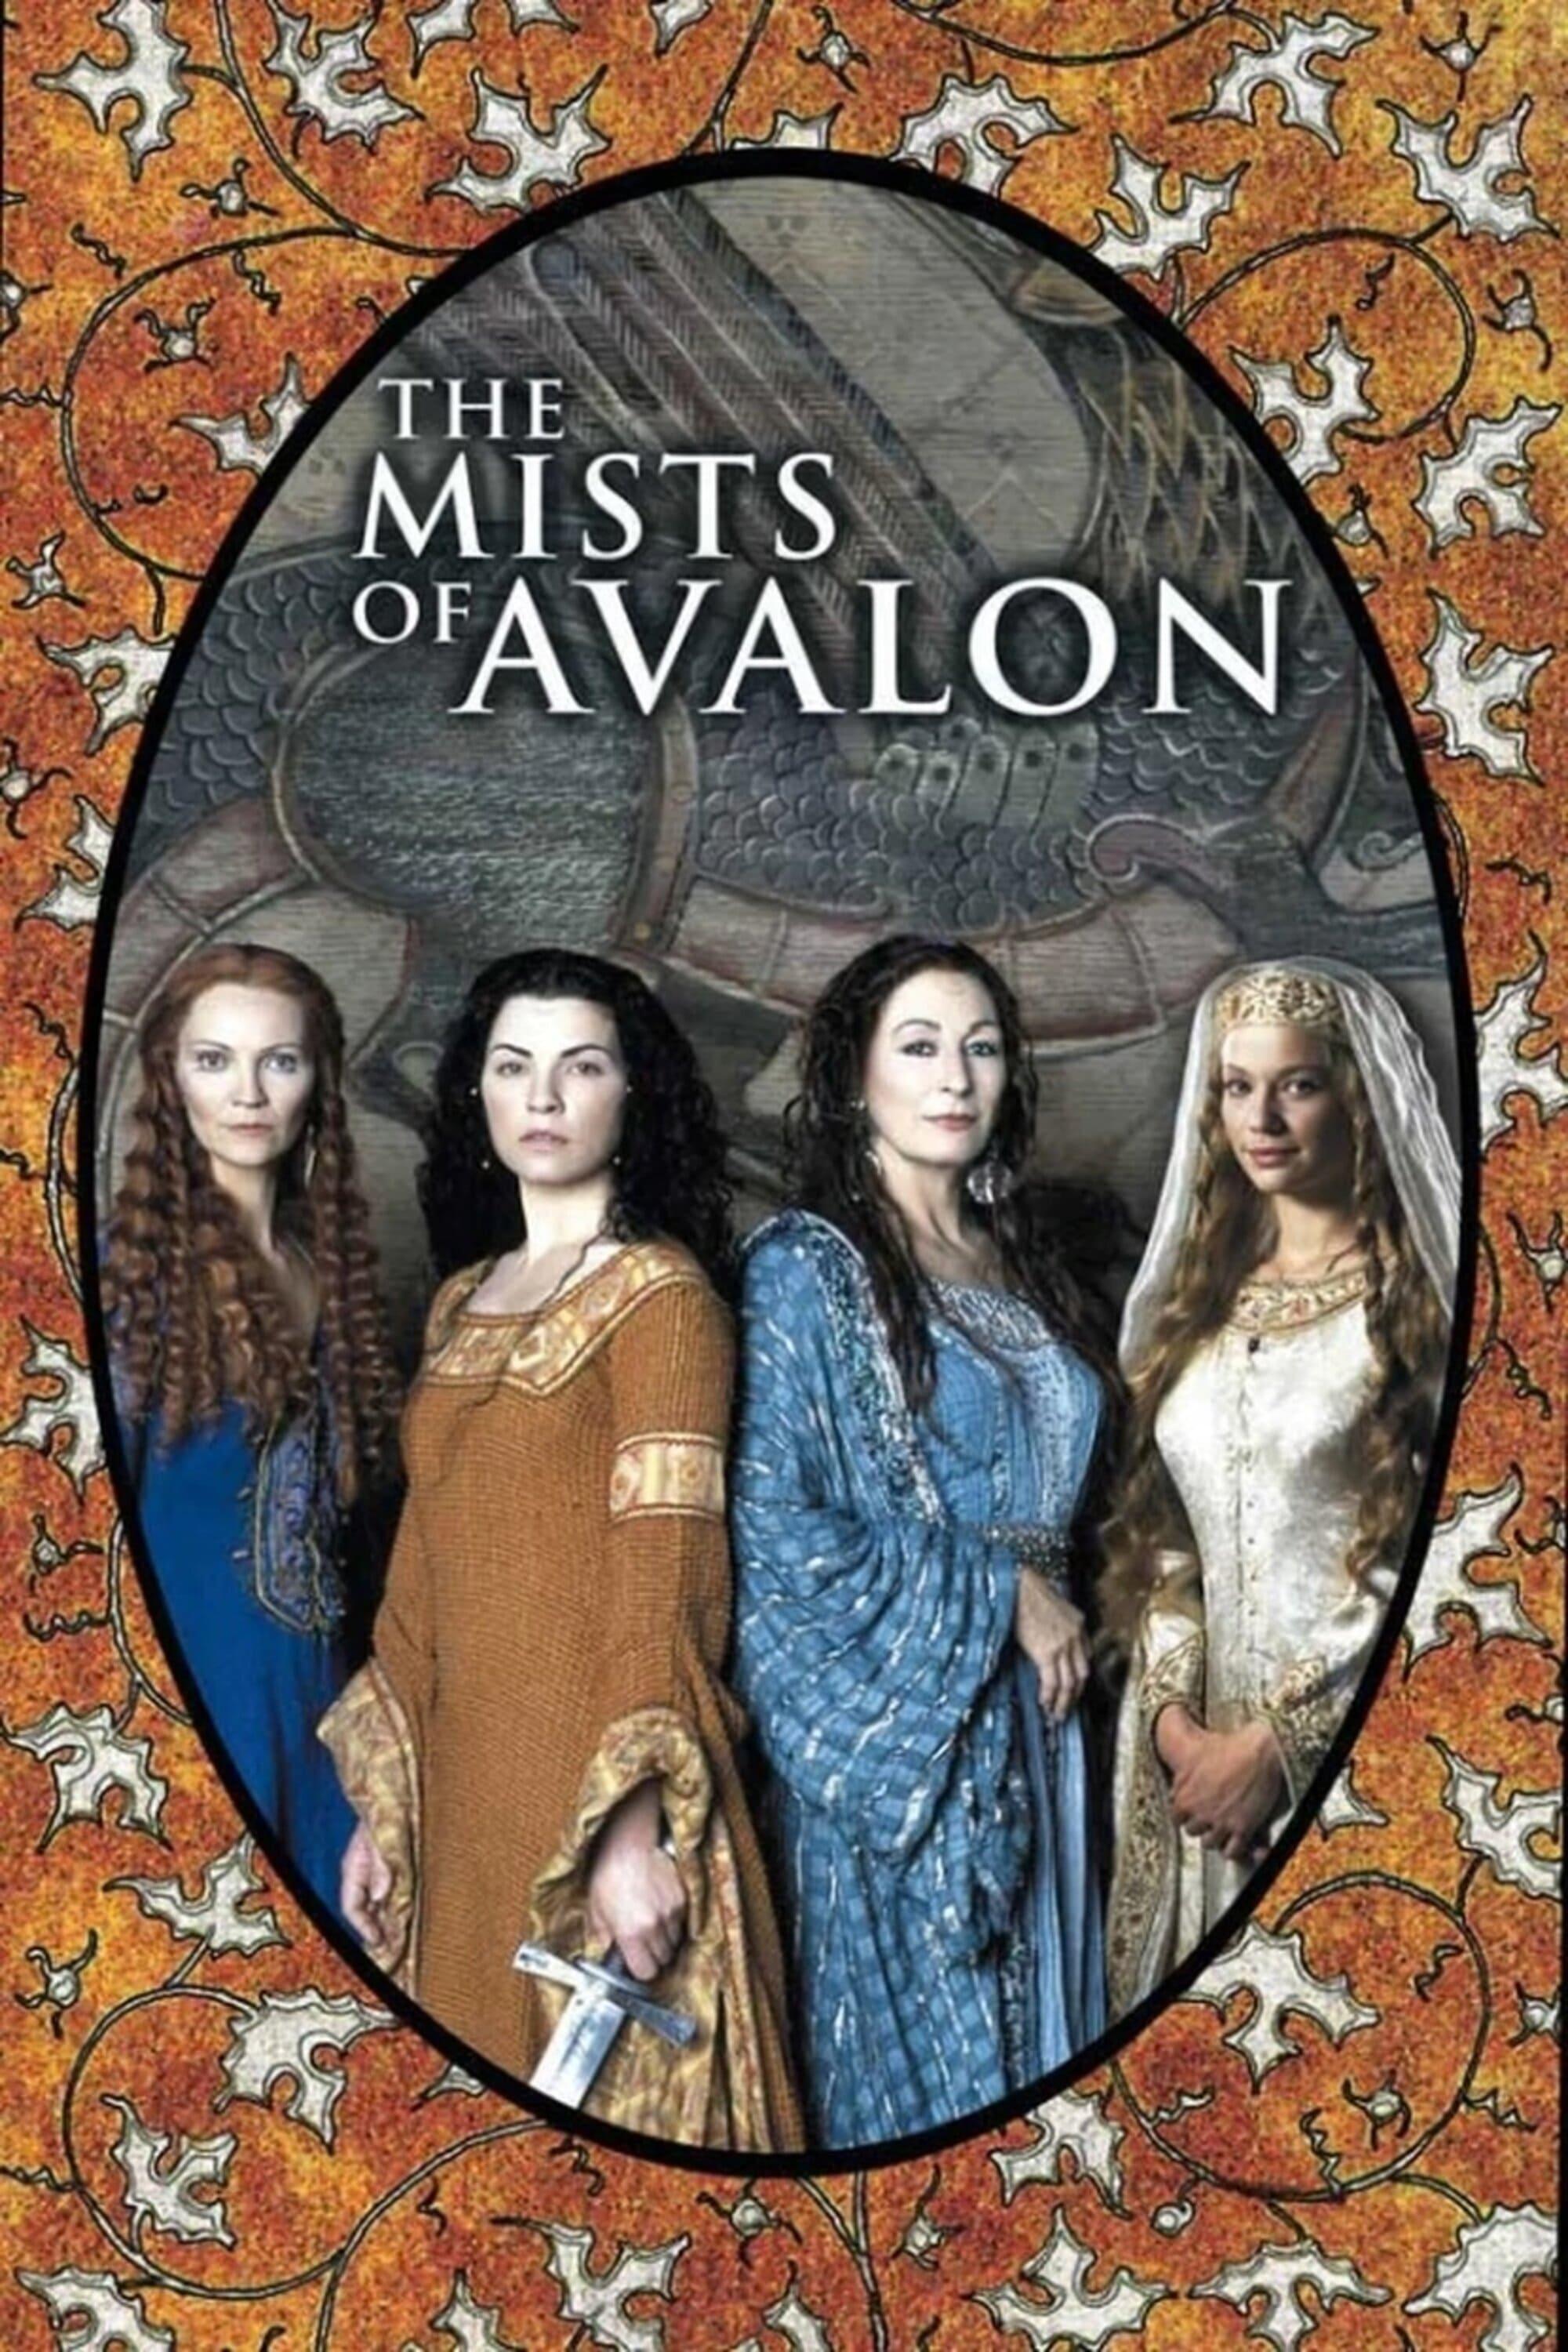 The Mists of Avalon poster